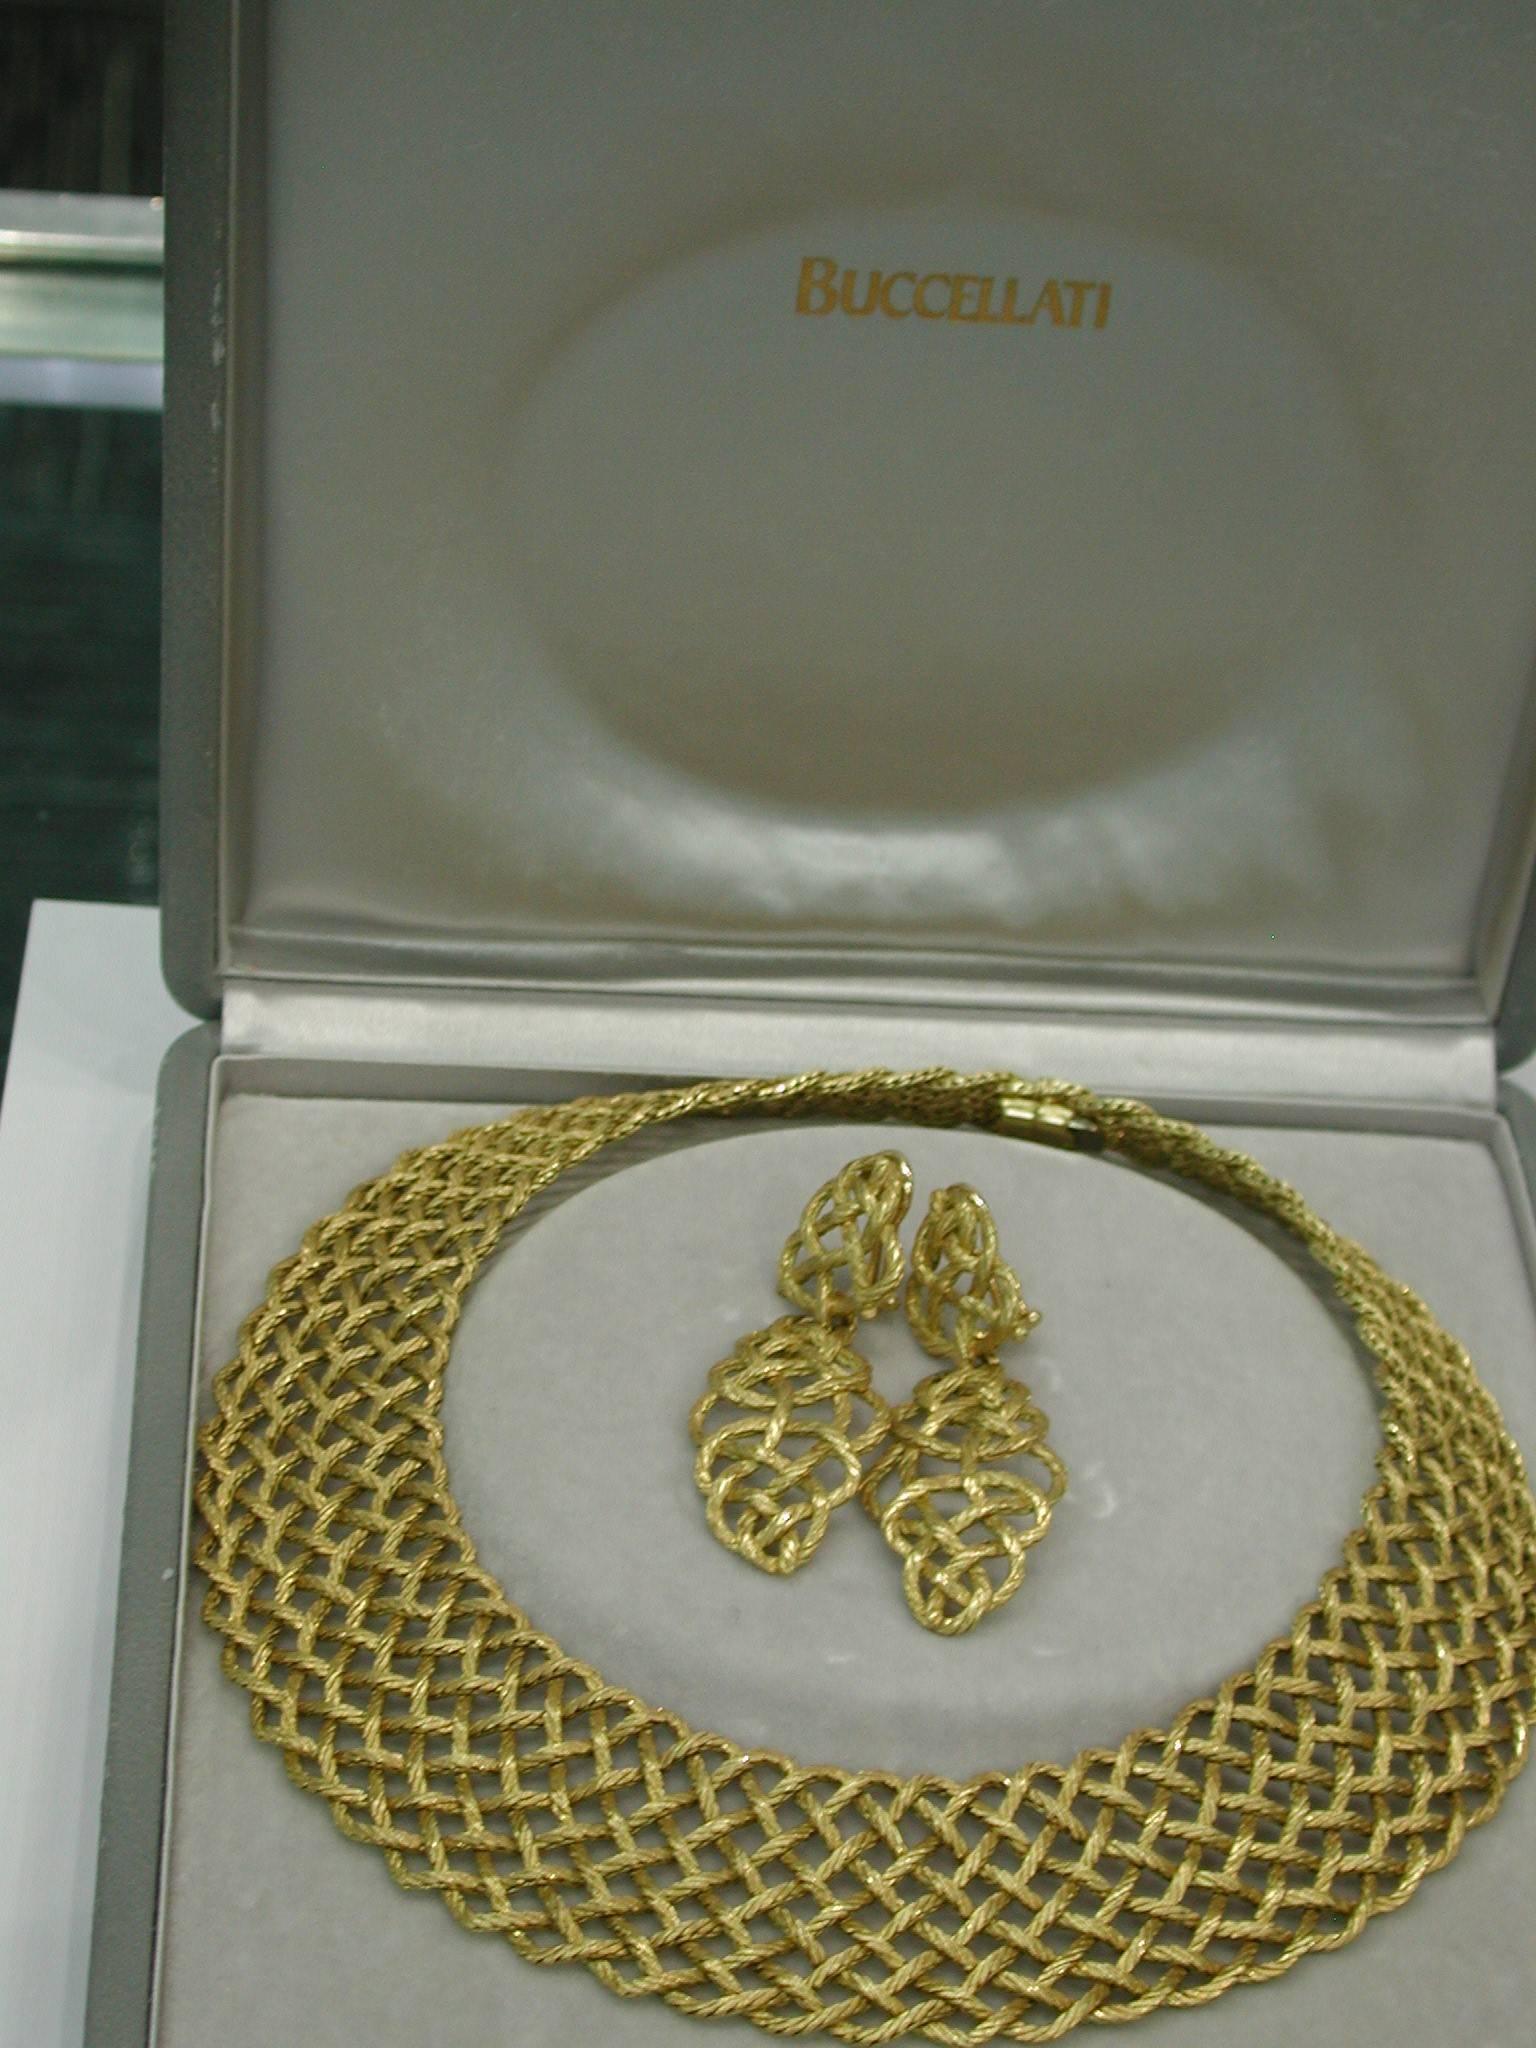 18K Yellow Gold Woven Collar and Earring Set CREPE DE CHINE Collection Excellent condition comes with Buccellati presentation box.
